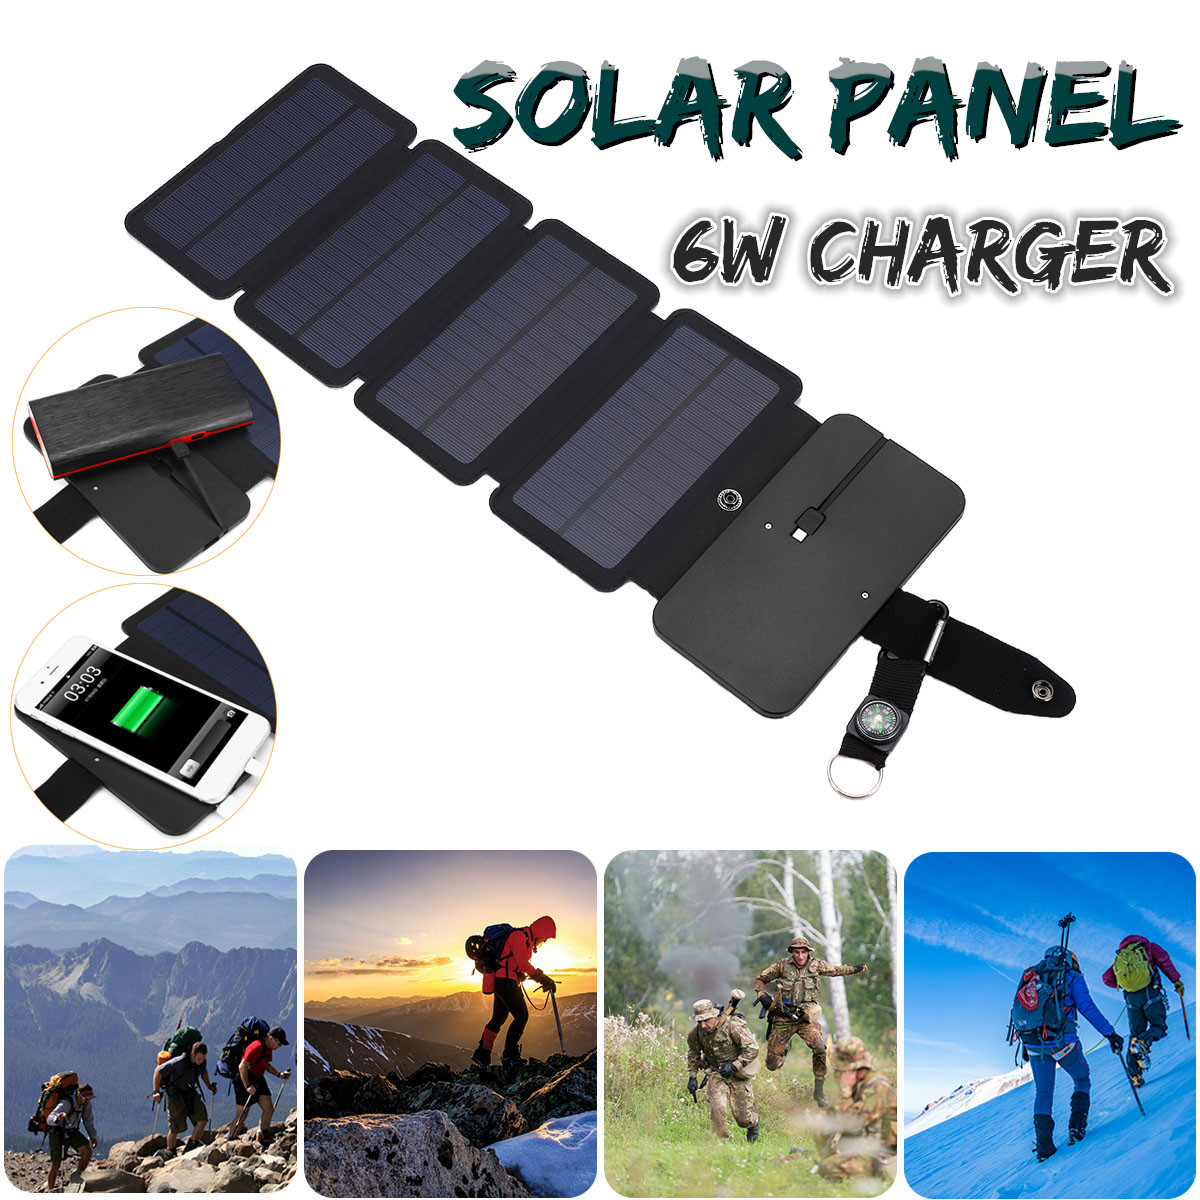 6W-Portable-Foldable-Solar-Panel-Power-Charger-For-Phone-MP3MP4PDA-Power-Bank-1430184-2